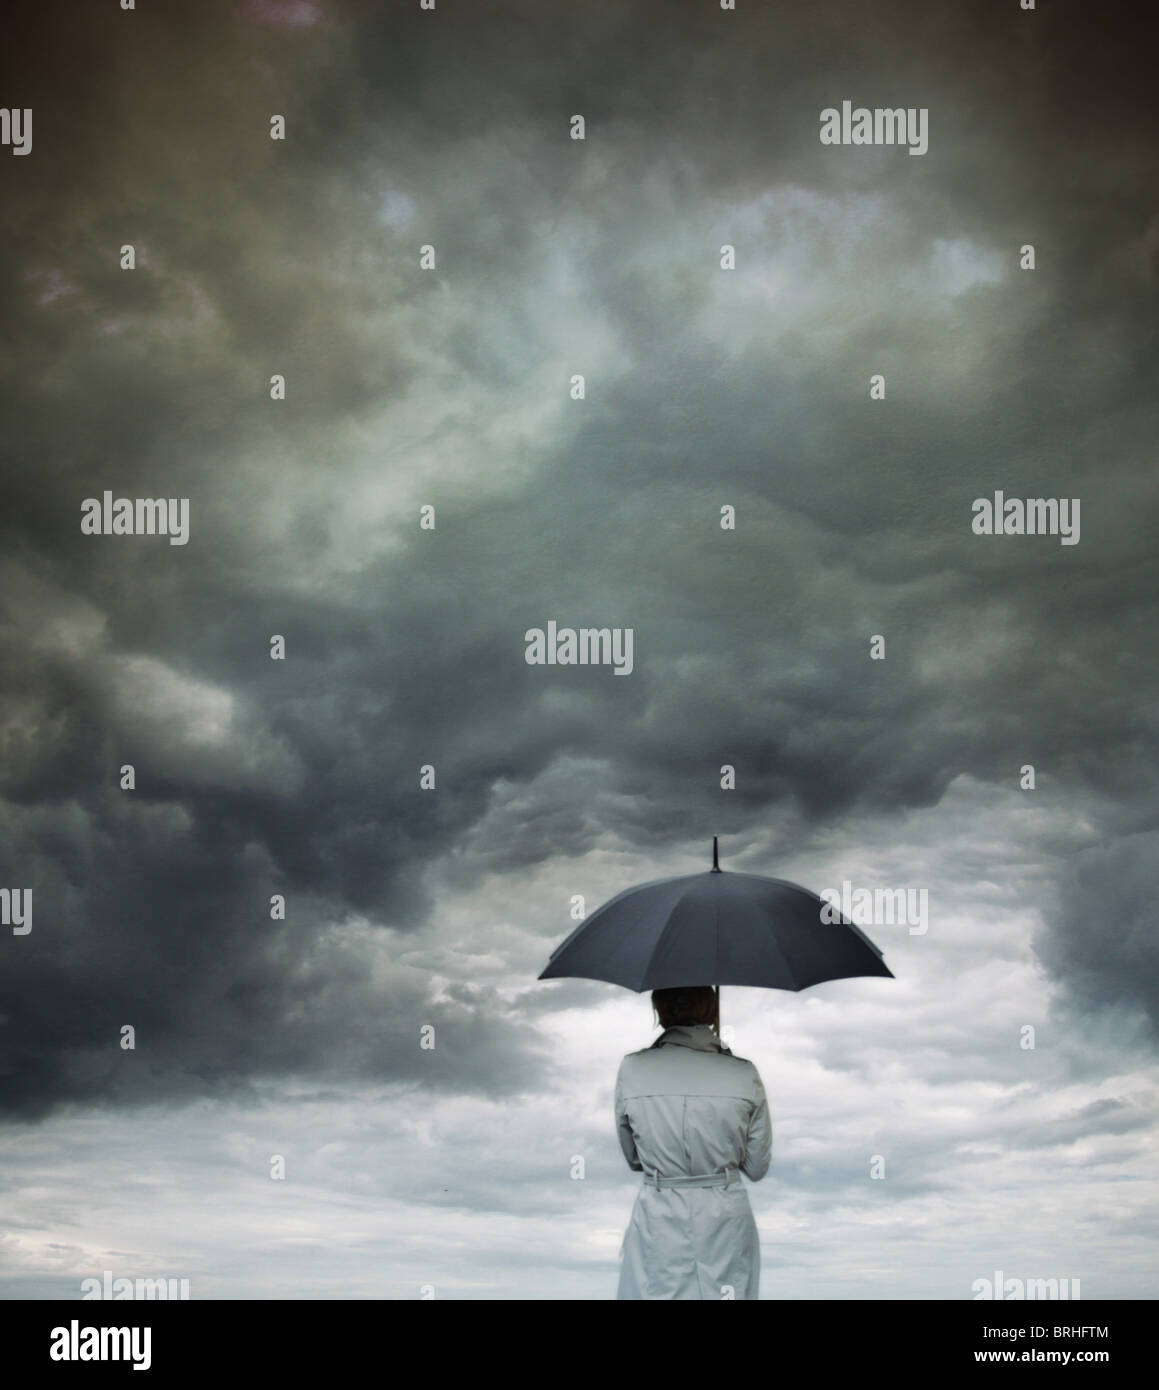 business woman with an umbrella Stock Photo